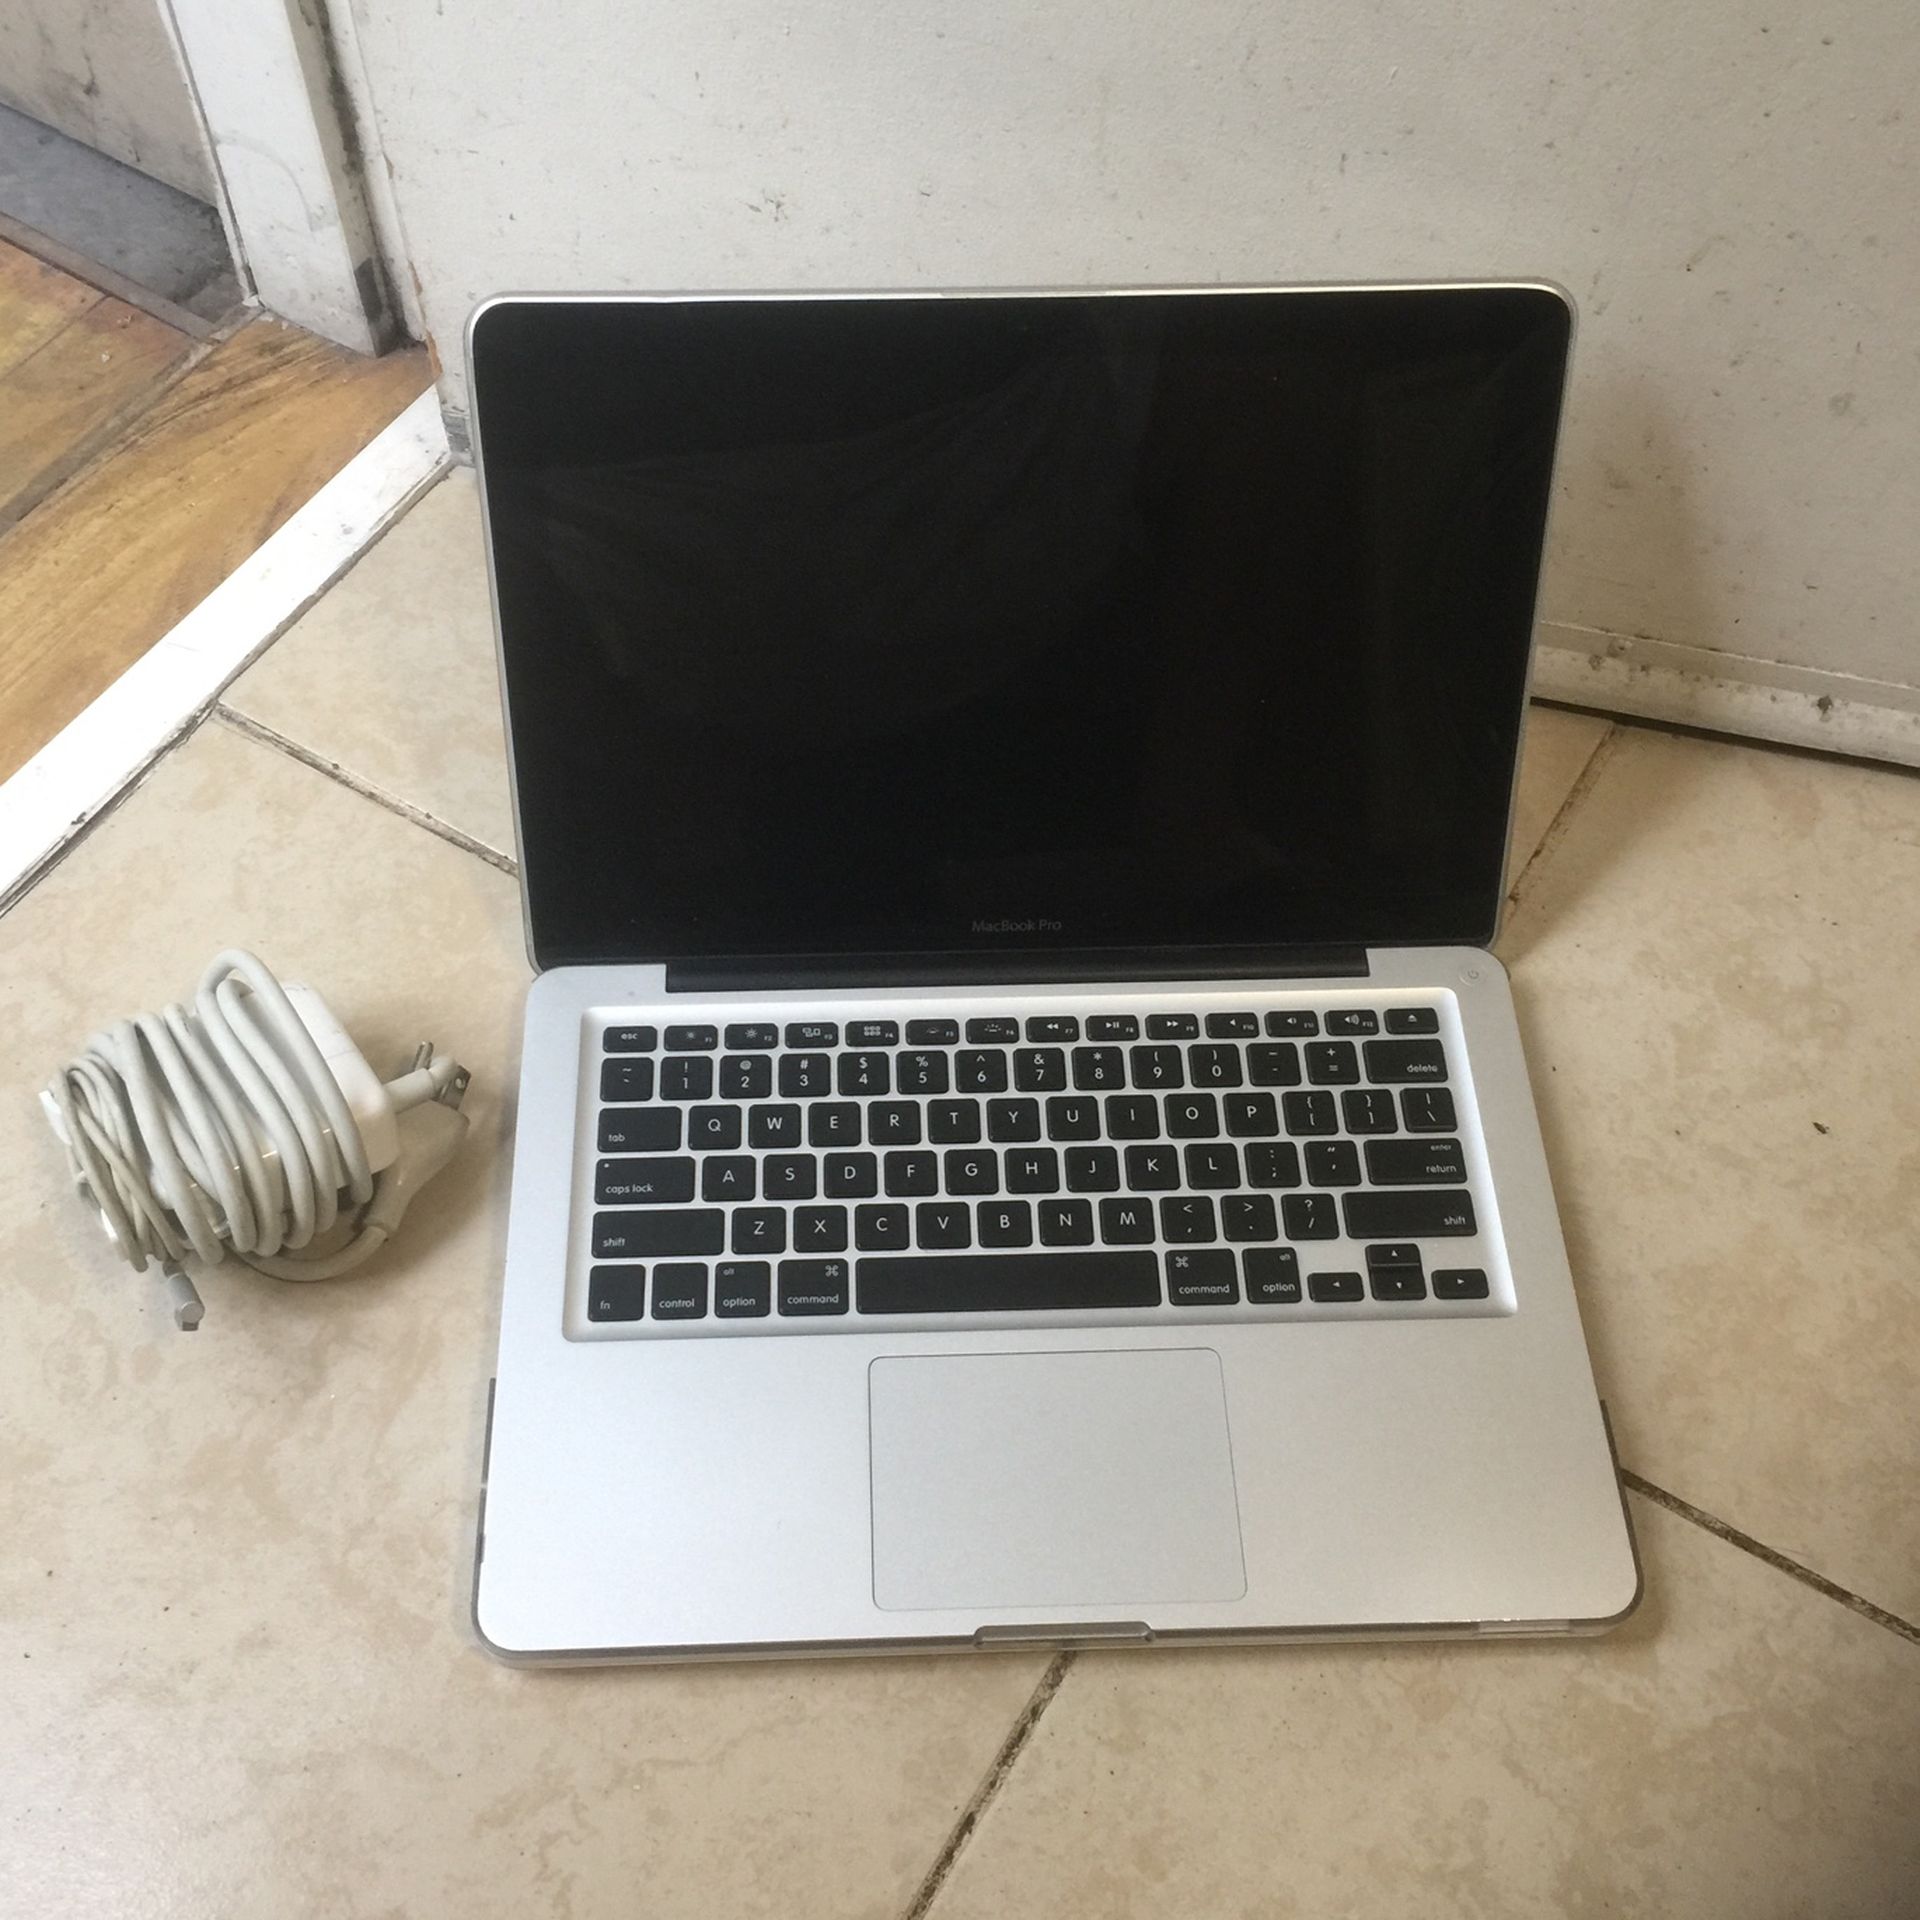 Nine MacBook Pro For Parts 2012 i5 Processor 500gb hardrive 6gb ram come with Charger good condition Just stop Working